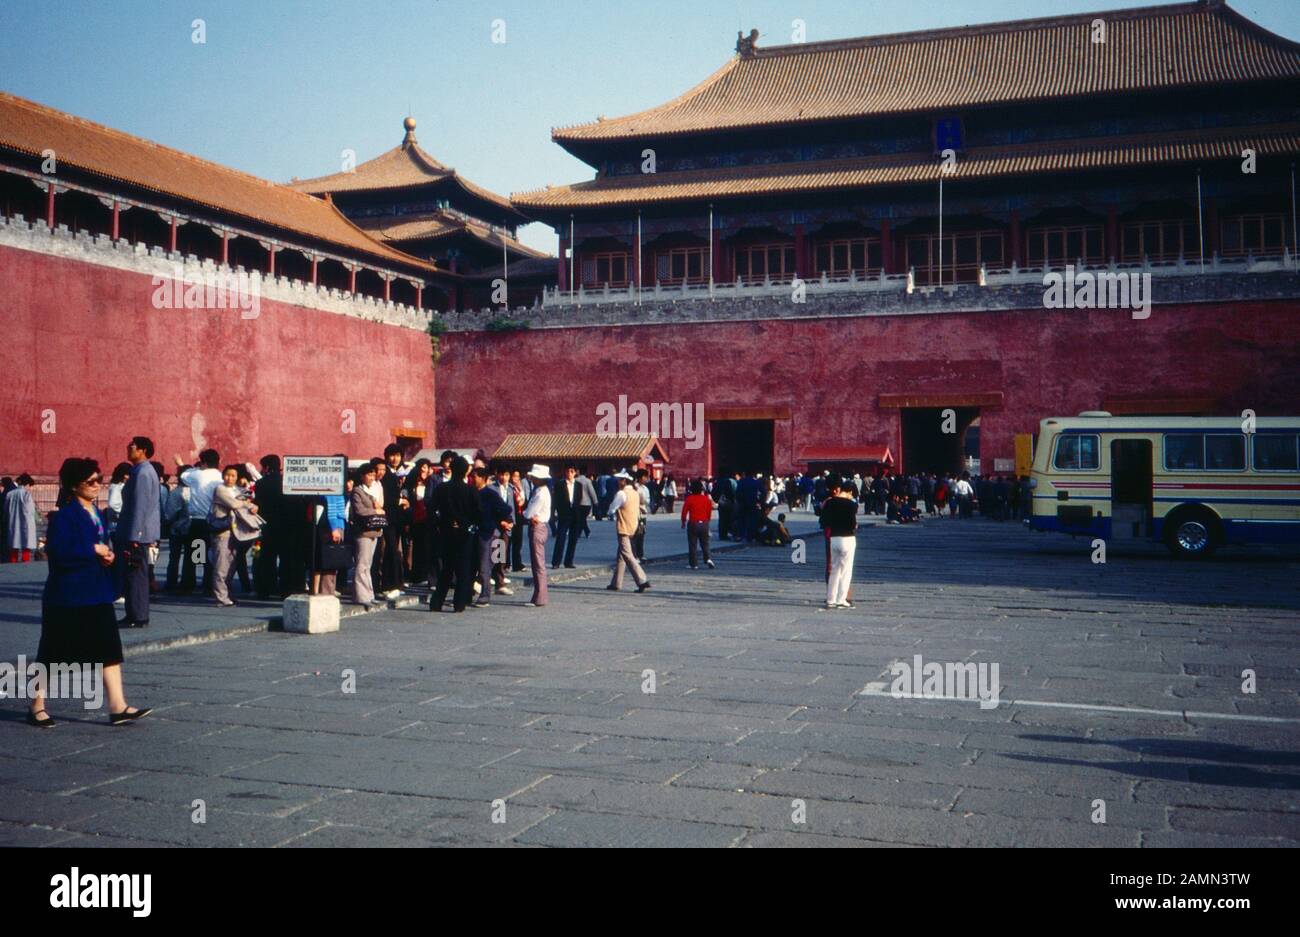 Im Kaiserpalast in der Verbotenen Stadt in Peking, China 1980er At the Emperor's palace in the Forbidden City at Beijing, China 1980s. Stock Photo